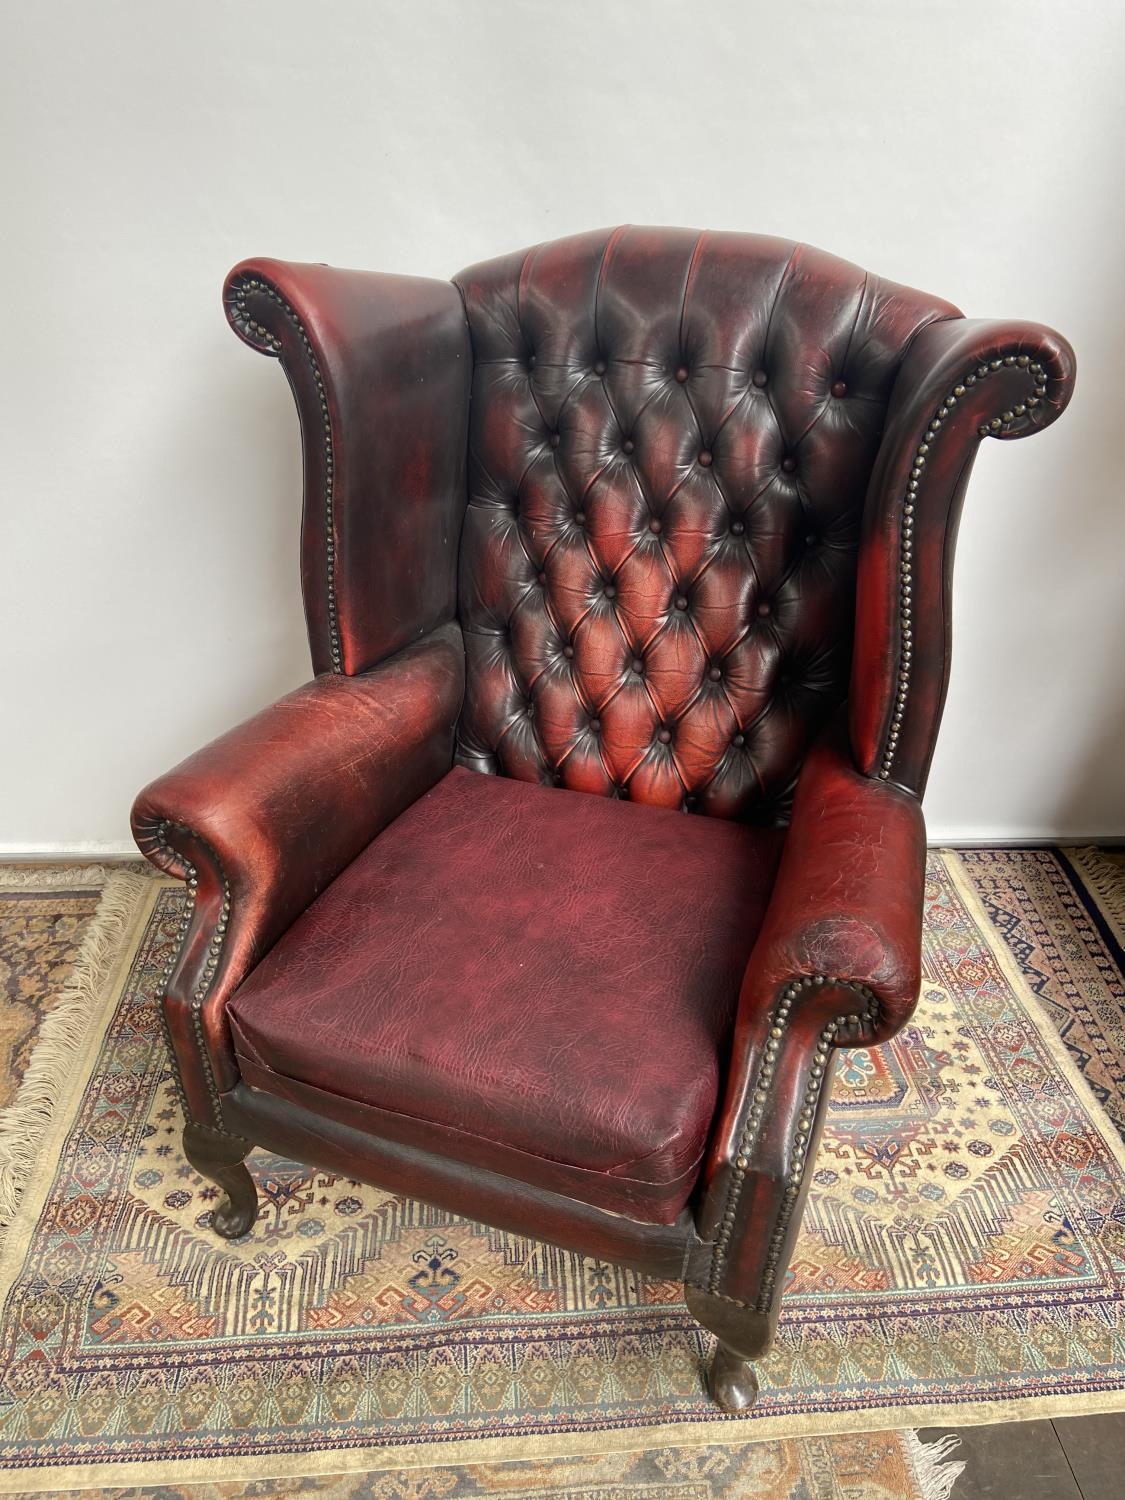 Antique chesterfield oxblood red gull wing arm chair. [107cm in height]